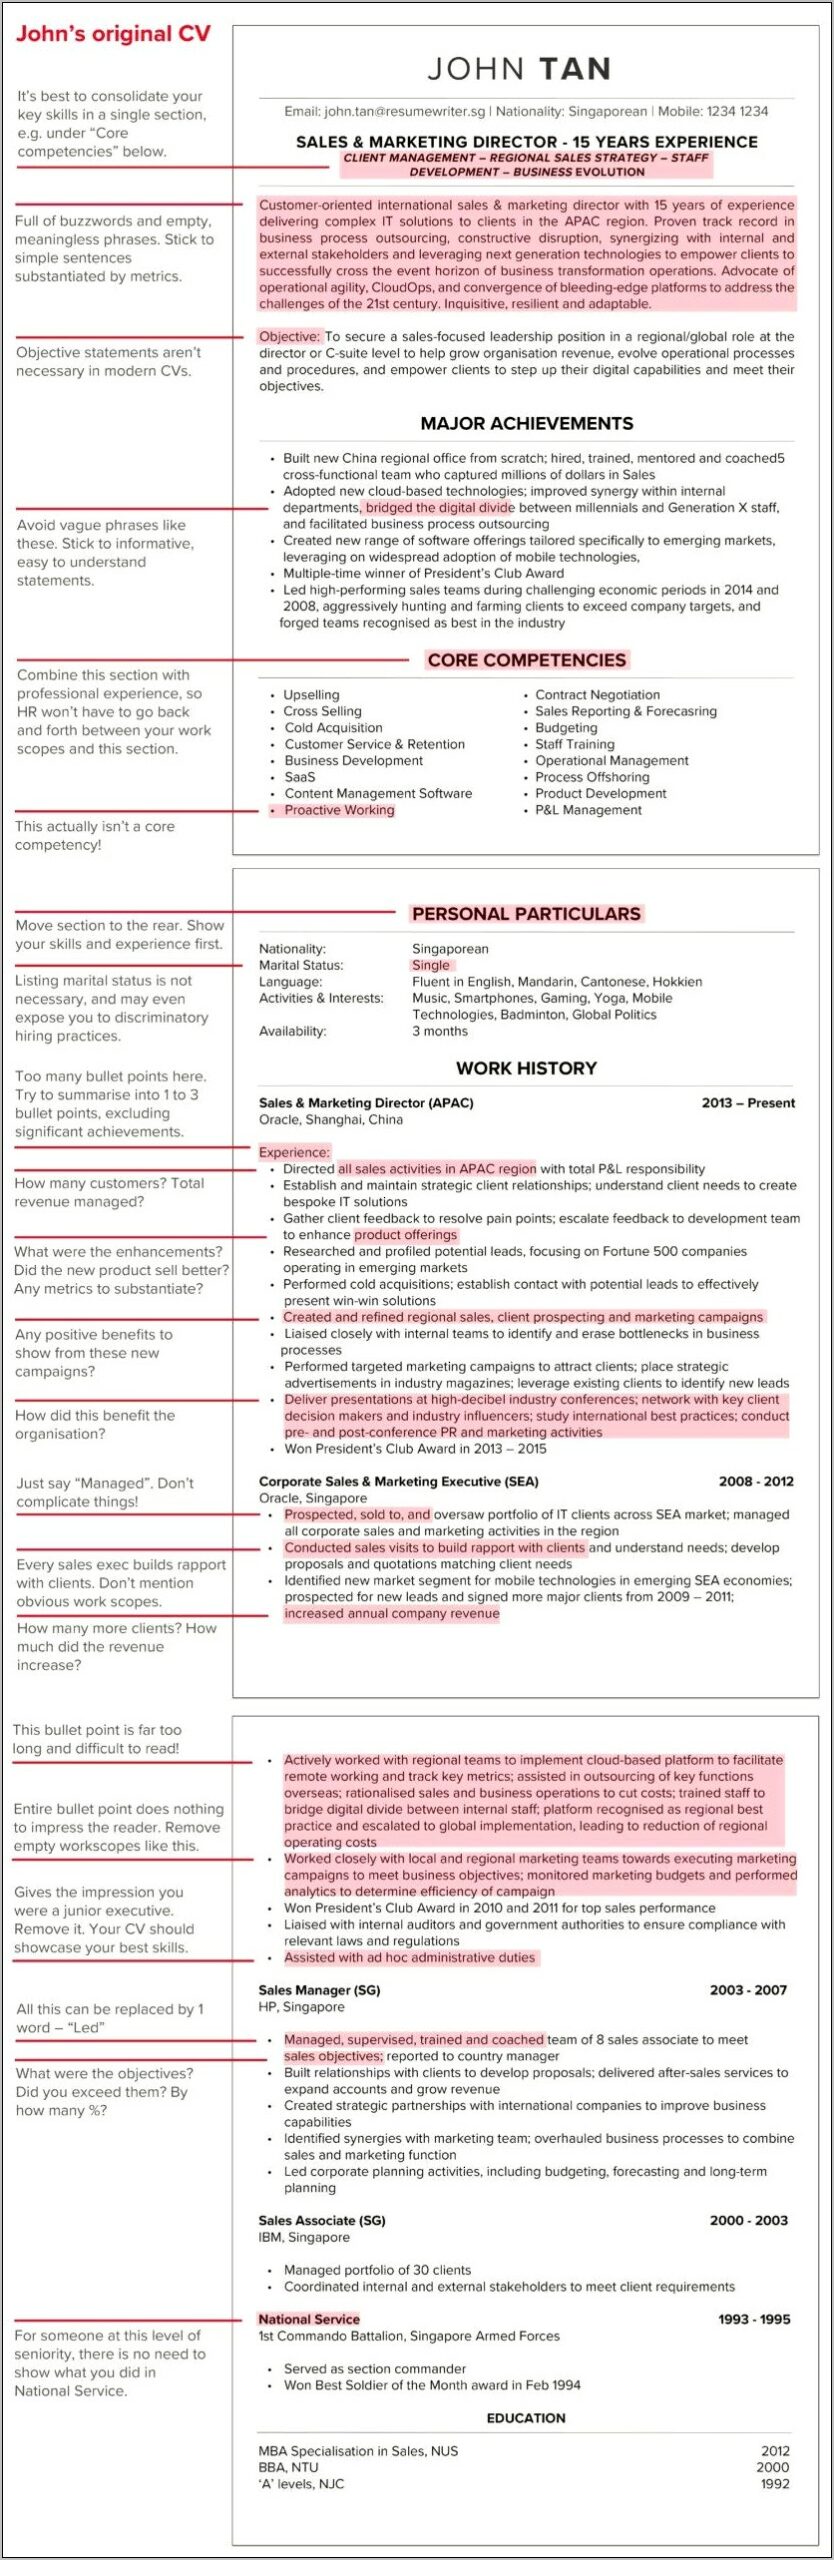 List Of Qualifications To Put On Resume